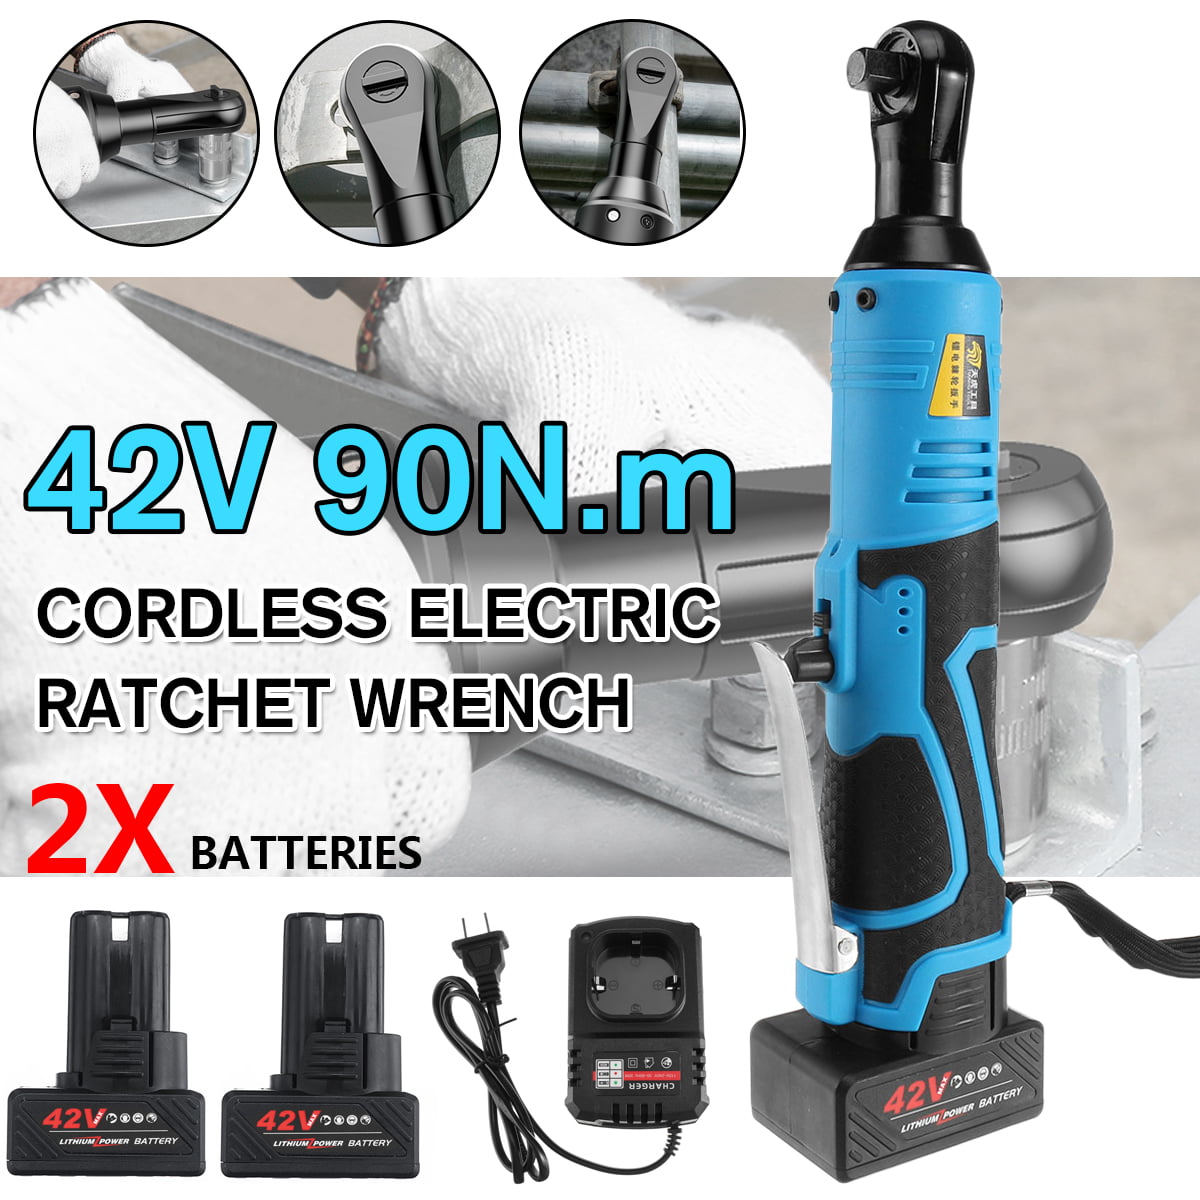 Zitainn Multifunctional Electric Wrench,Multifunctional Cordless Rechargeable Electric Wrench 3/8 Inch Right Angle Electric Ratchet Wrenches with LED Light